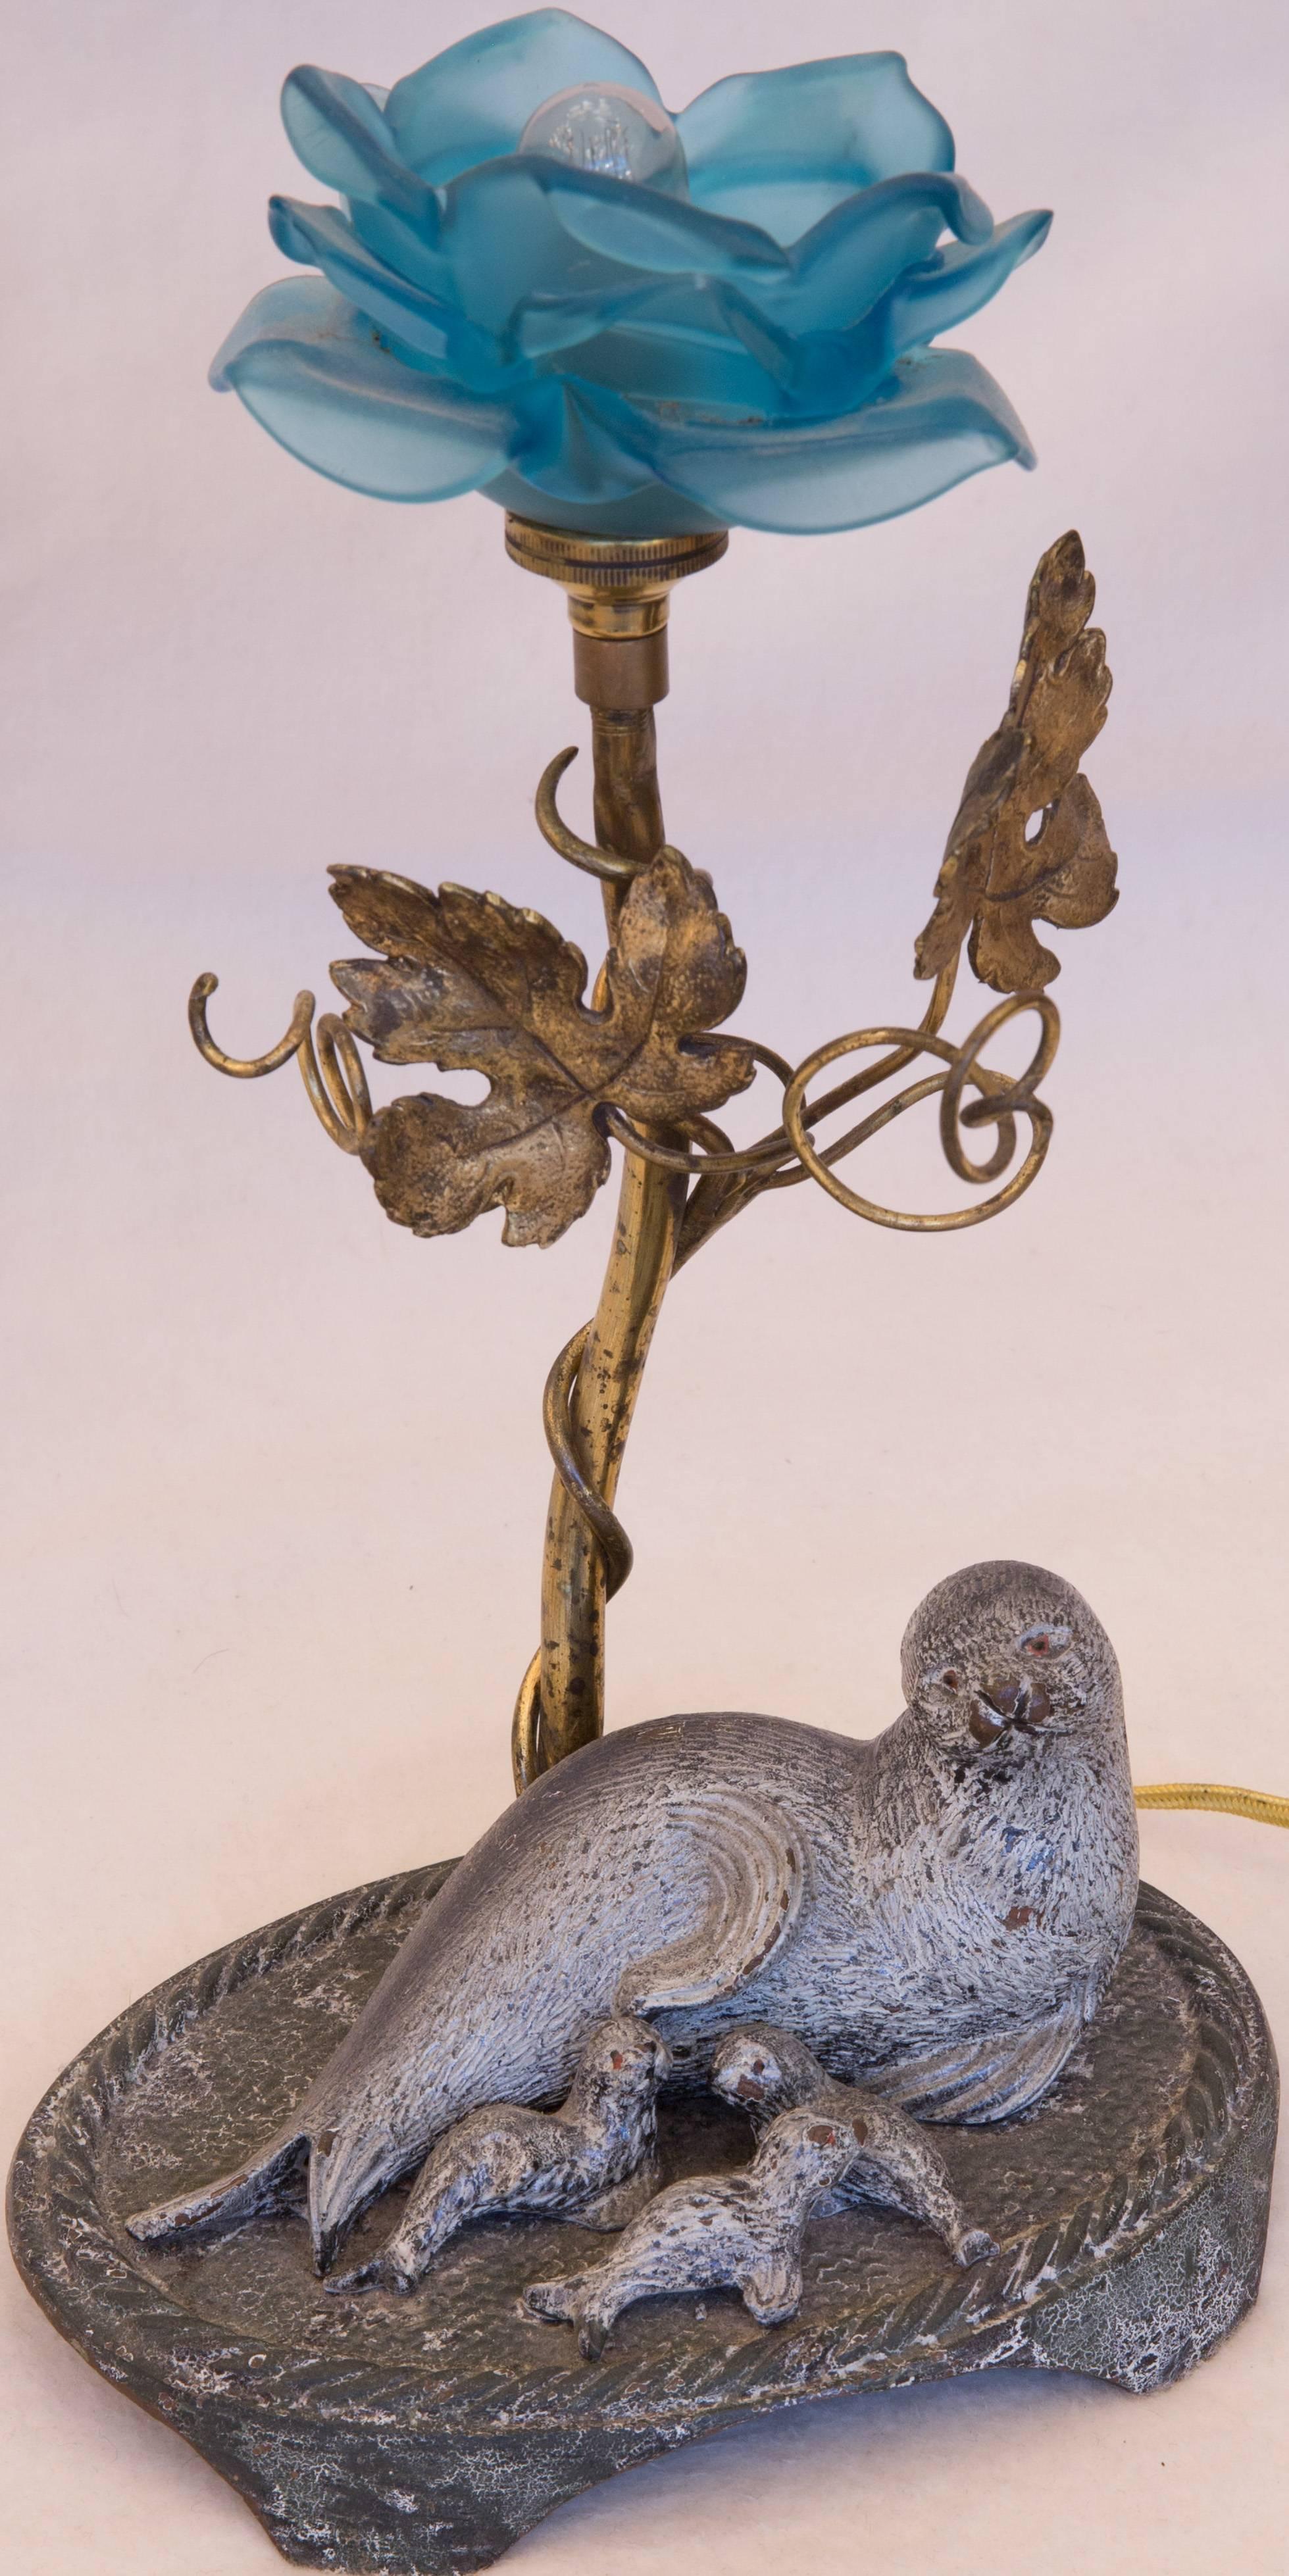 Delicately designed electric desk or table lamp with unique form having a glass blue rose with an intertwined brass branch. Cast bronze base of sea lion with her pups. Obviously a unique personal design by a maker unknown.